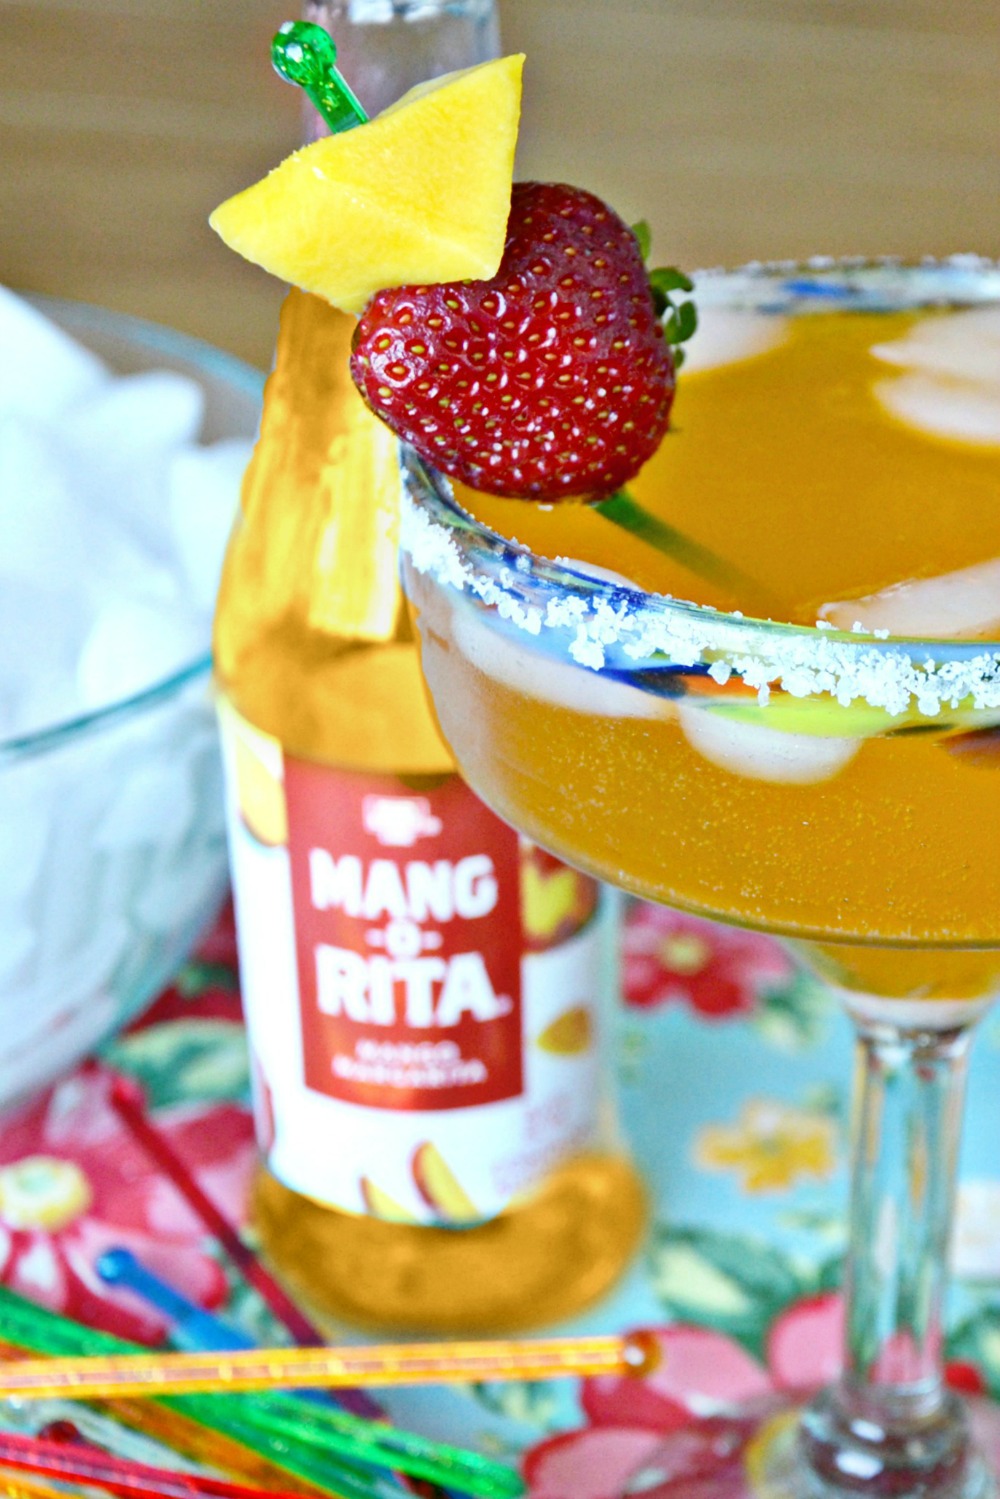 Add the Mang-O-Rita to your summer party plans.